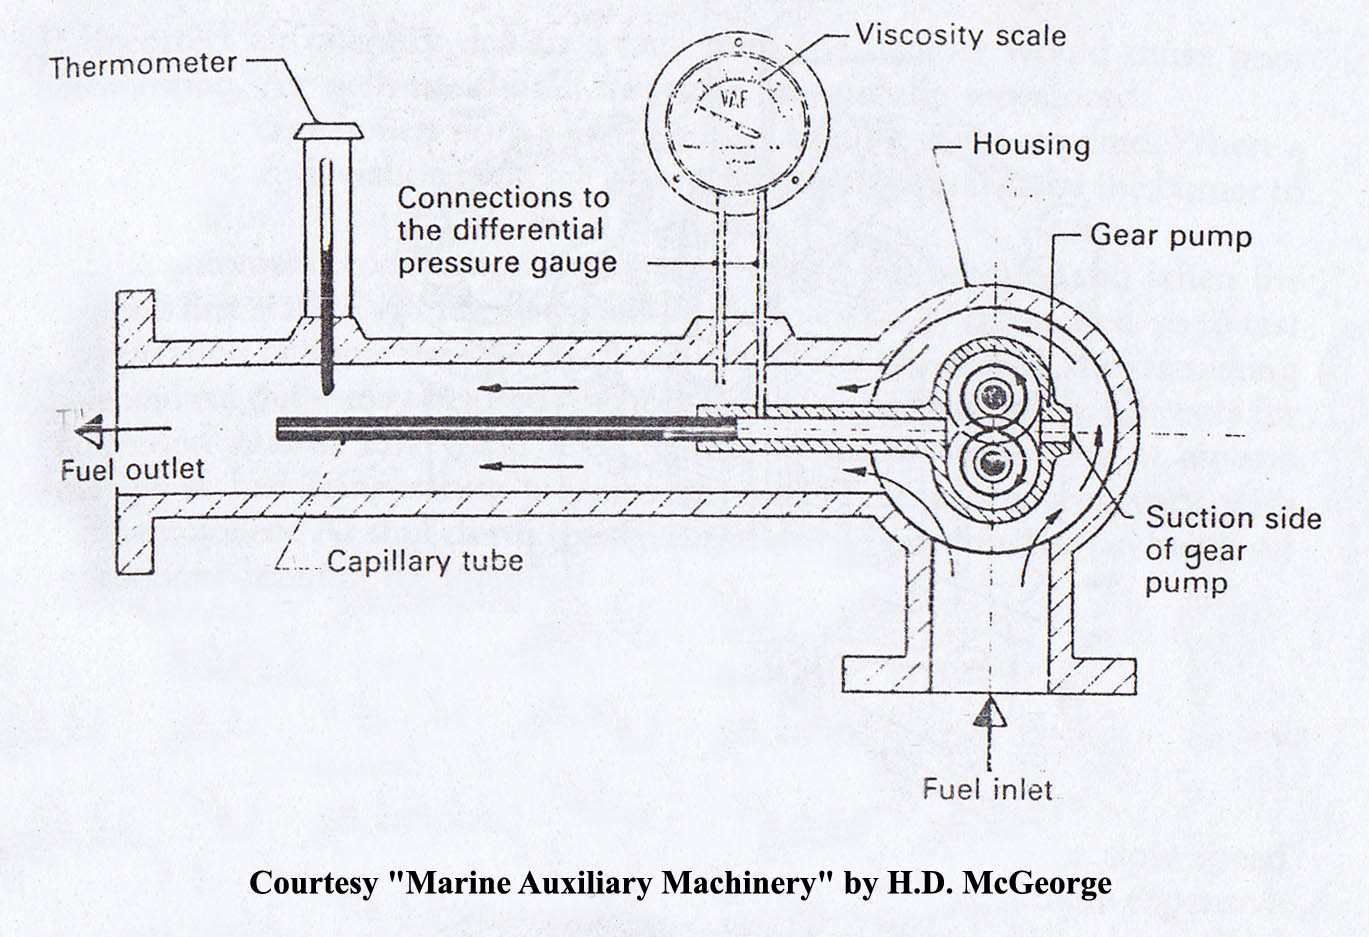 Schematic illustration of gear lubrication and cooling by means of